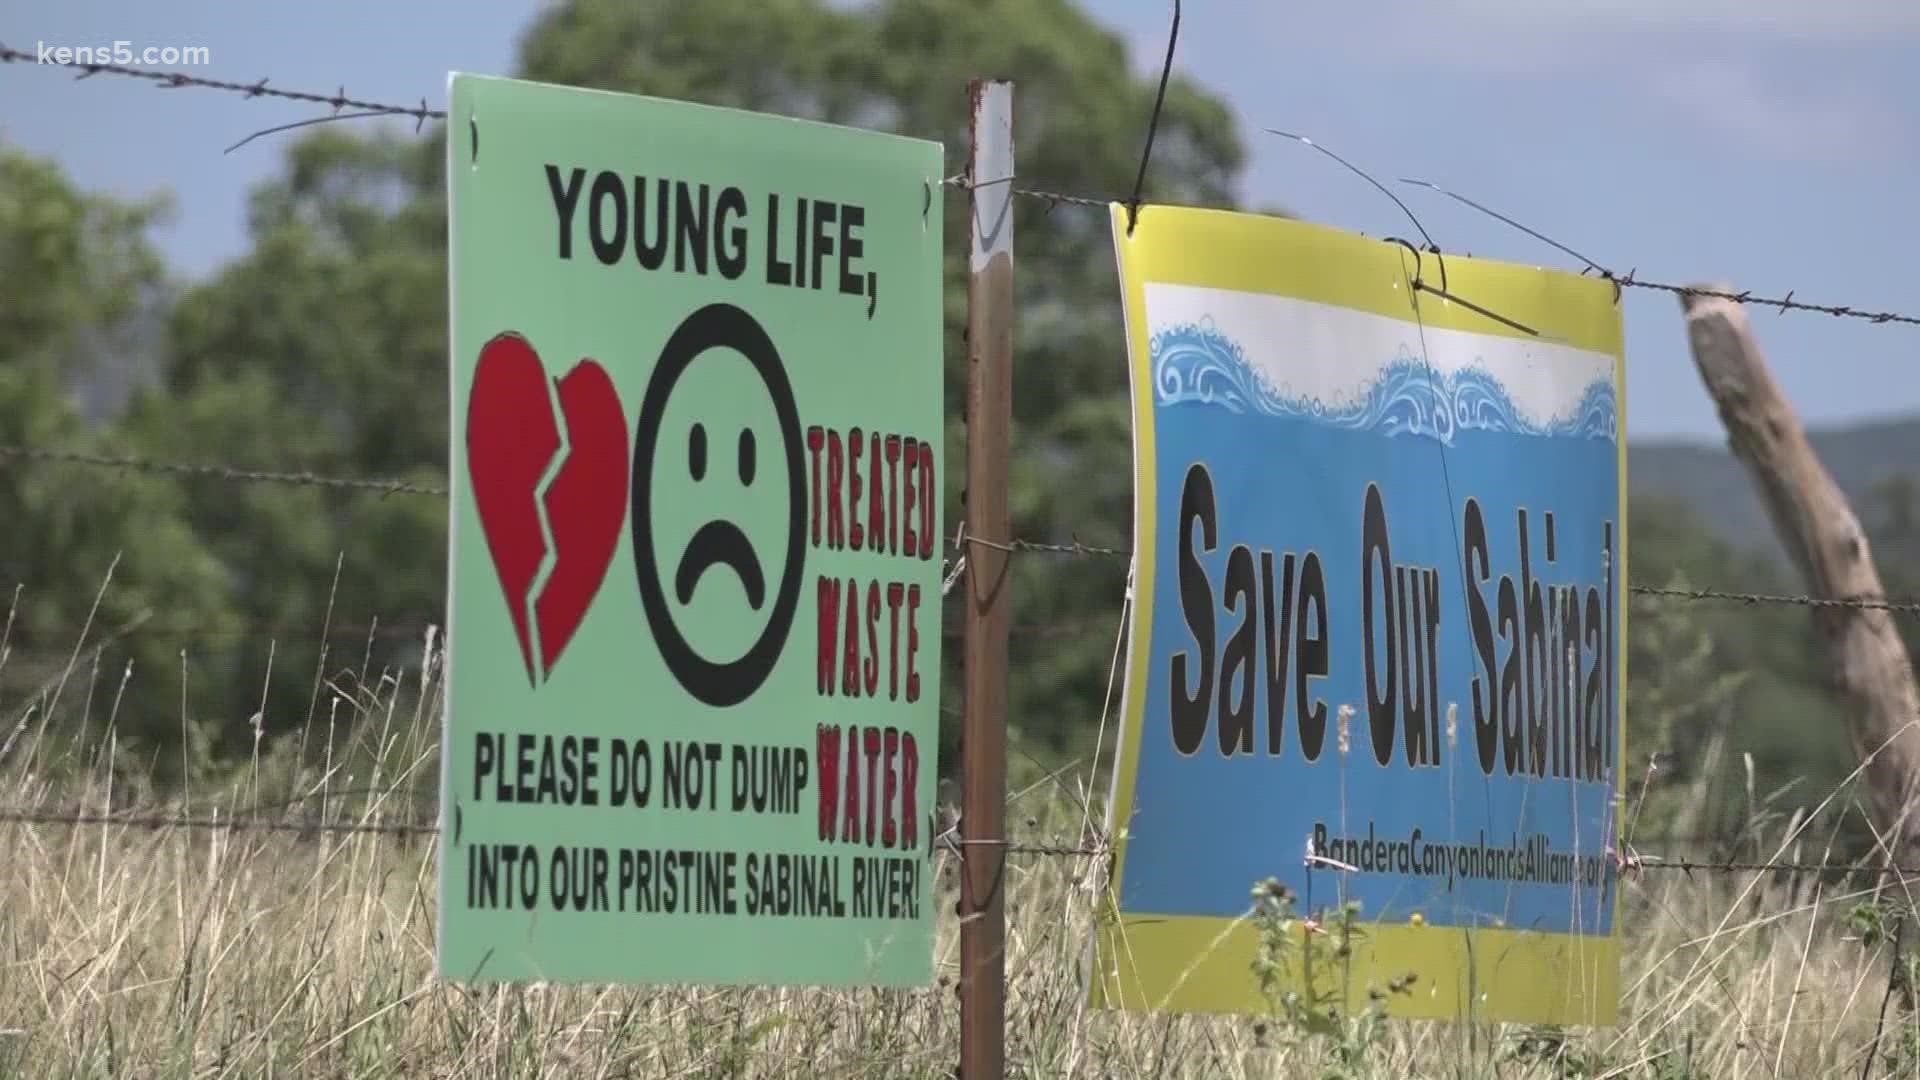 People in the Hill Country say they have fought for months to keep the pristine Sabinal River waters clean.